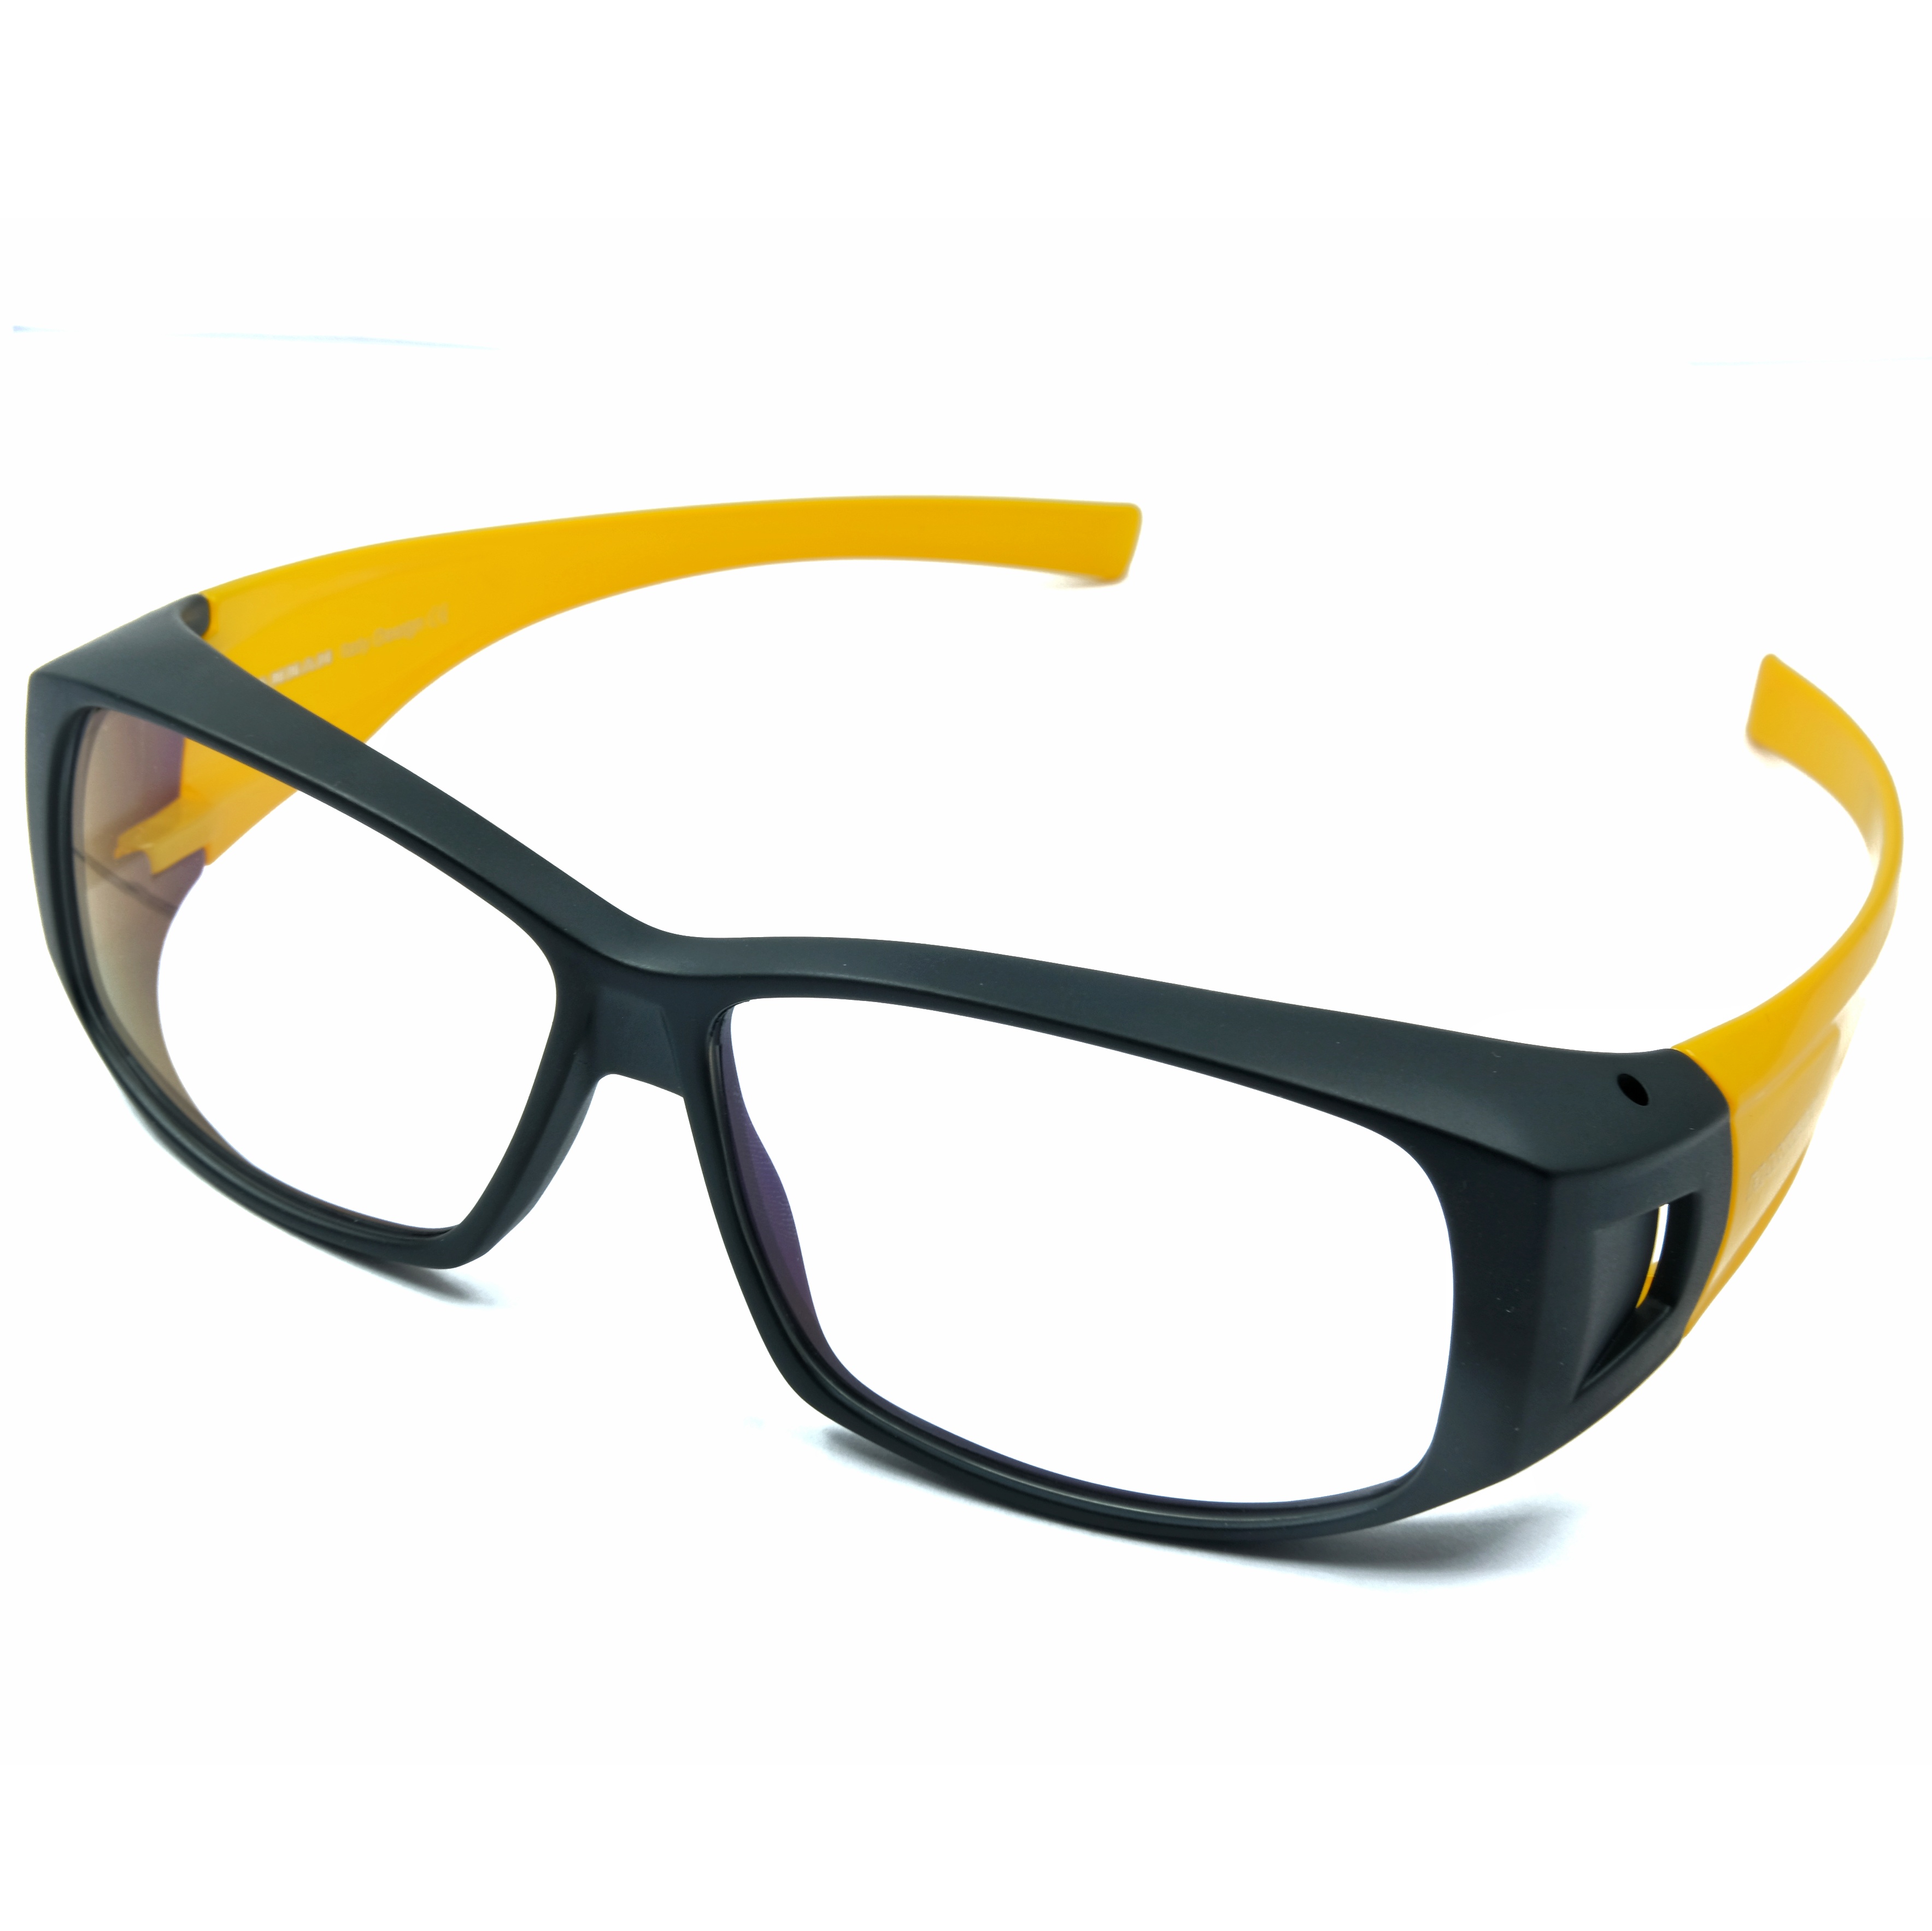 SWISS EMS TR Fit over Eyewear Chinese Eyeglasses Suppliers Best Eyewear Manufacturers in China